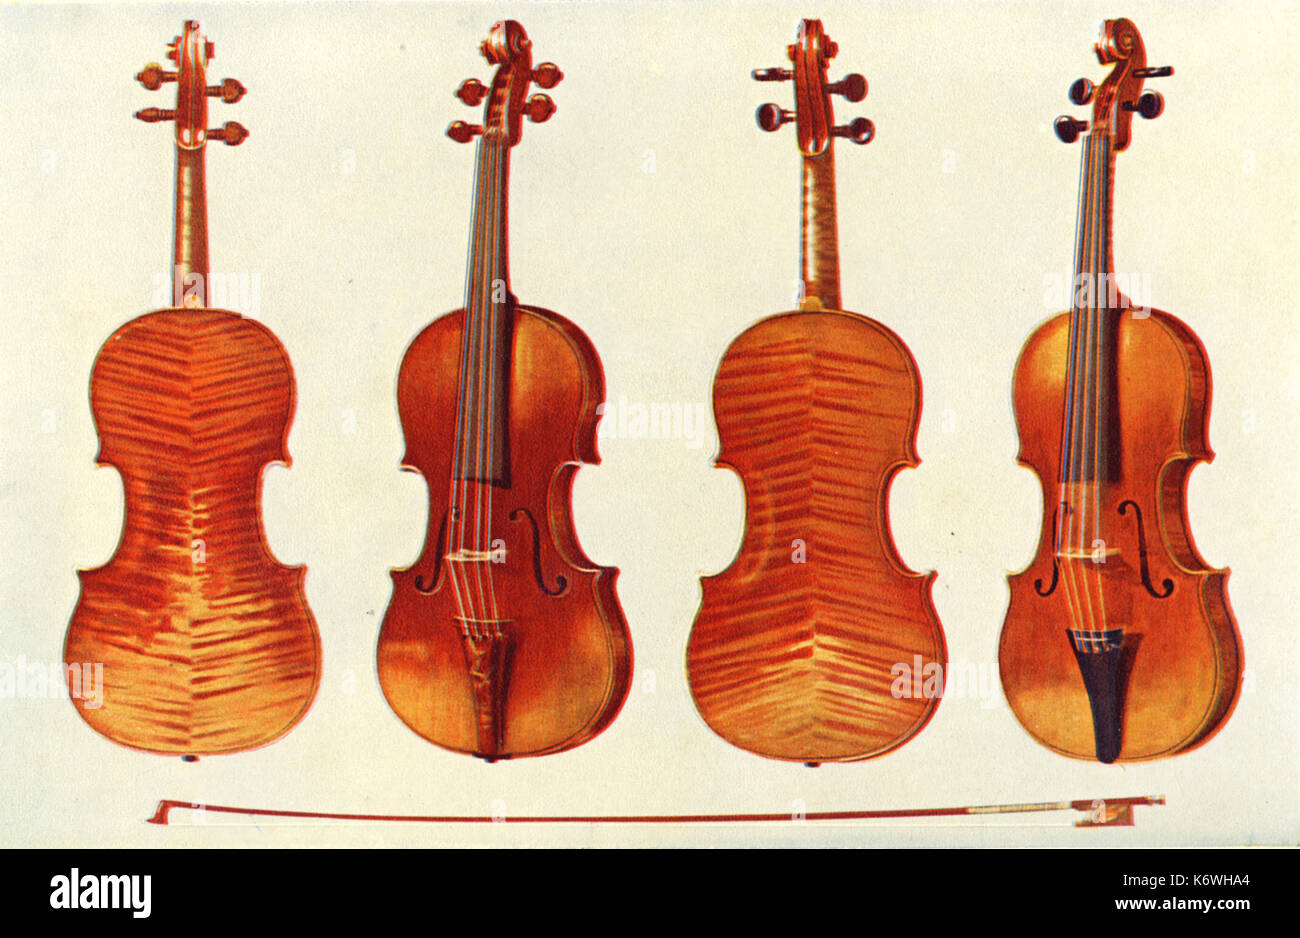 VIOLIN S- STRADIVARIUS & Guanerius 'Alard' Stradivarius (left, front & back views), 1715.  'King Joseph' Guarnerius del Gesu (right, front & back views).Also Tourte Bow, mounted with gold, silver, mother-of pearl. Drawn 1921 by Hipkins (Alfred James Hipkins 1826-1903) Stock Photo